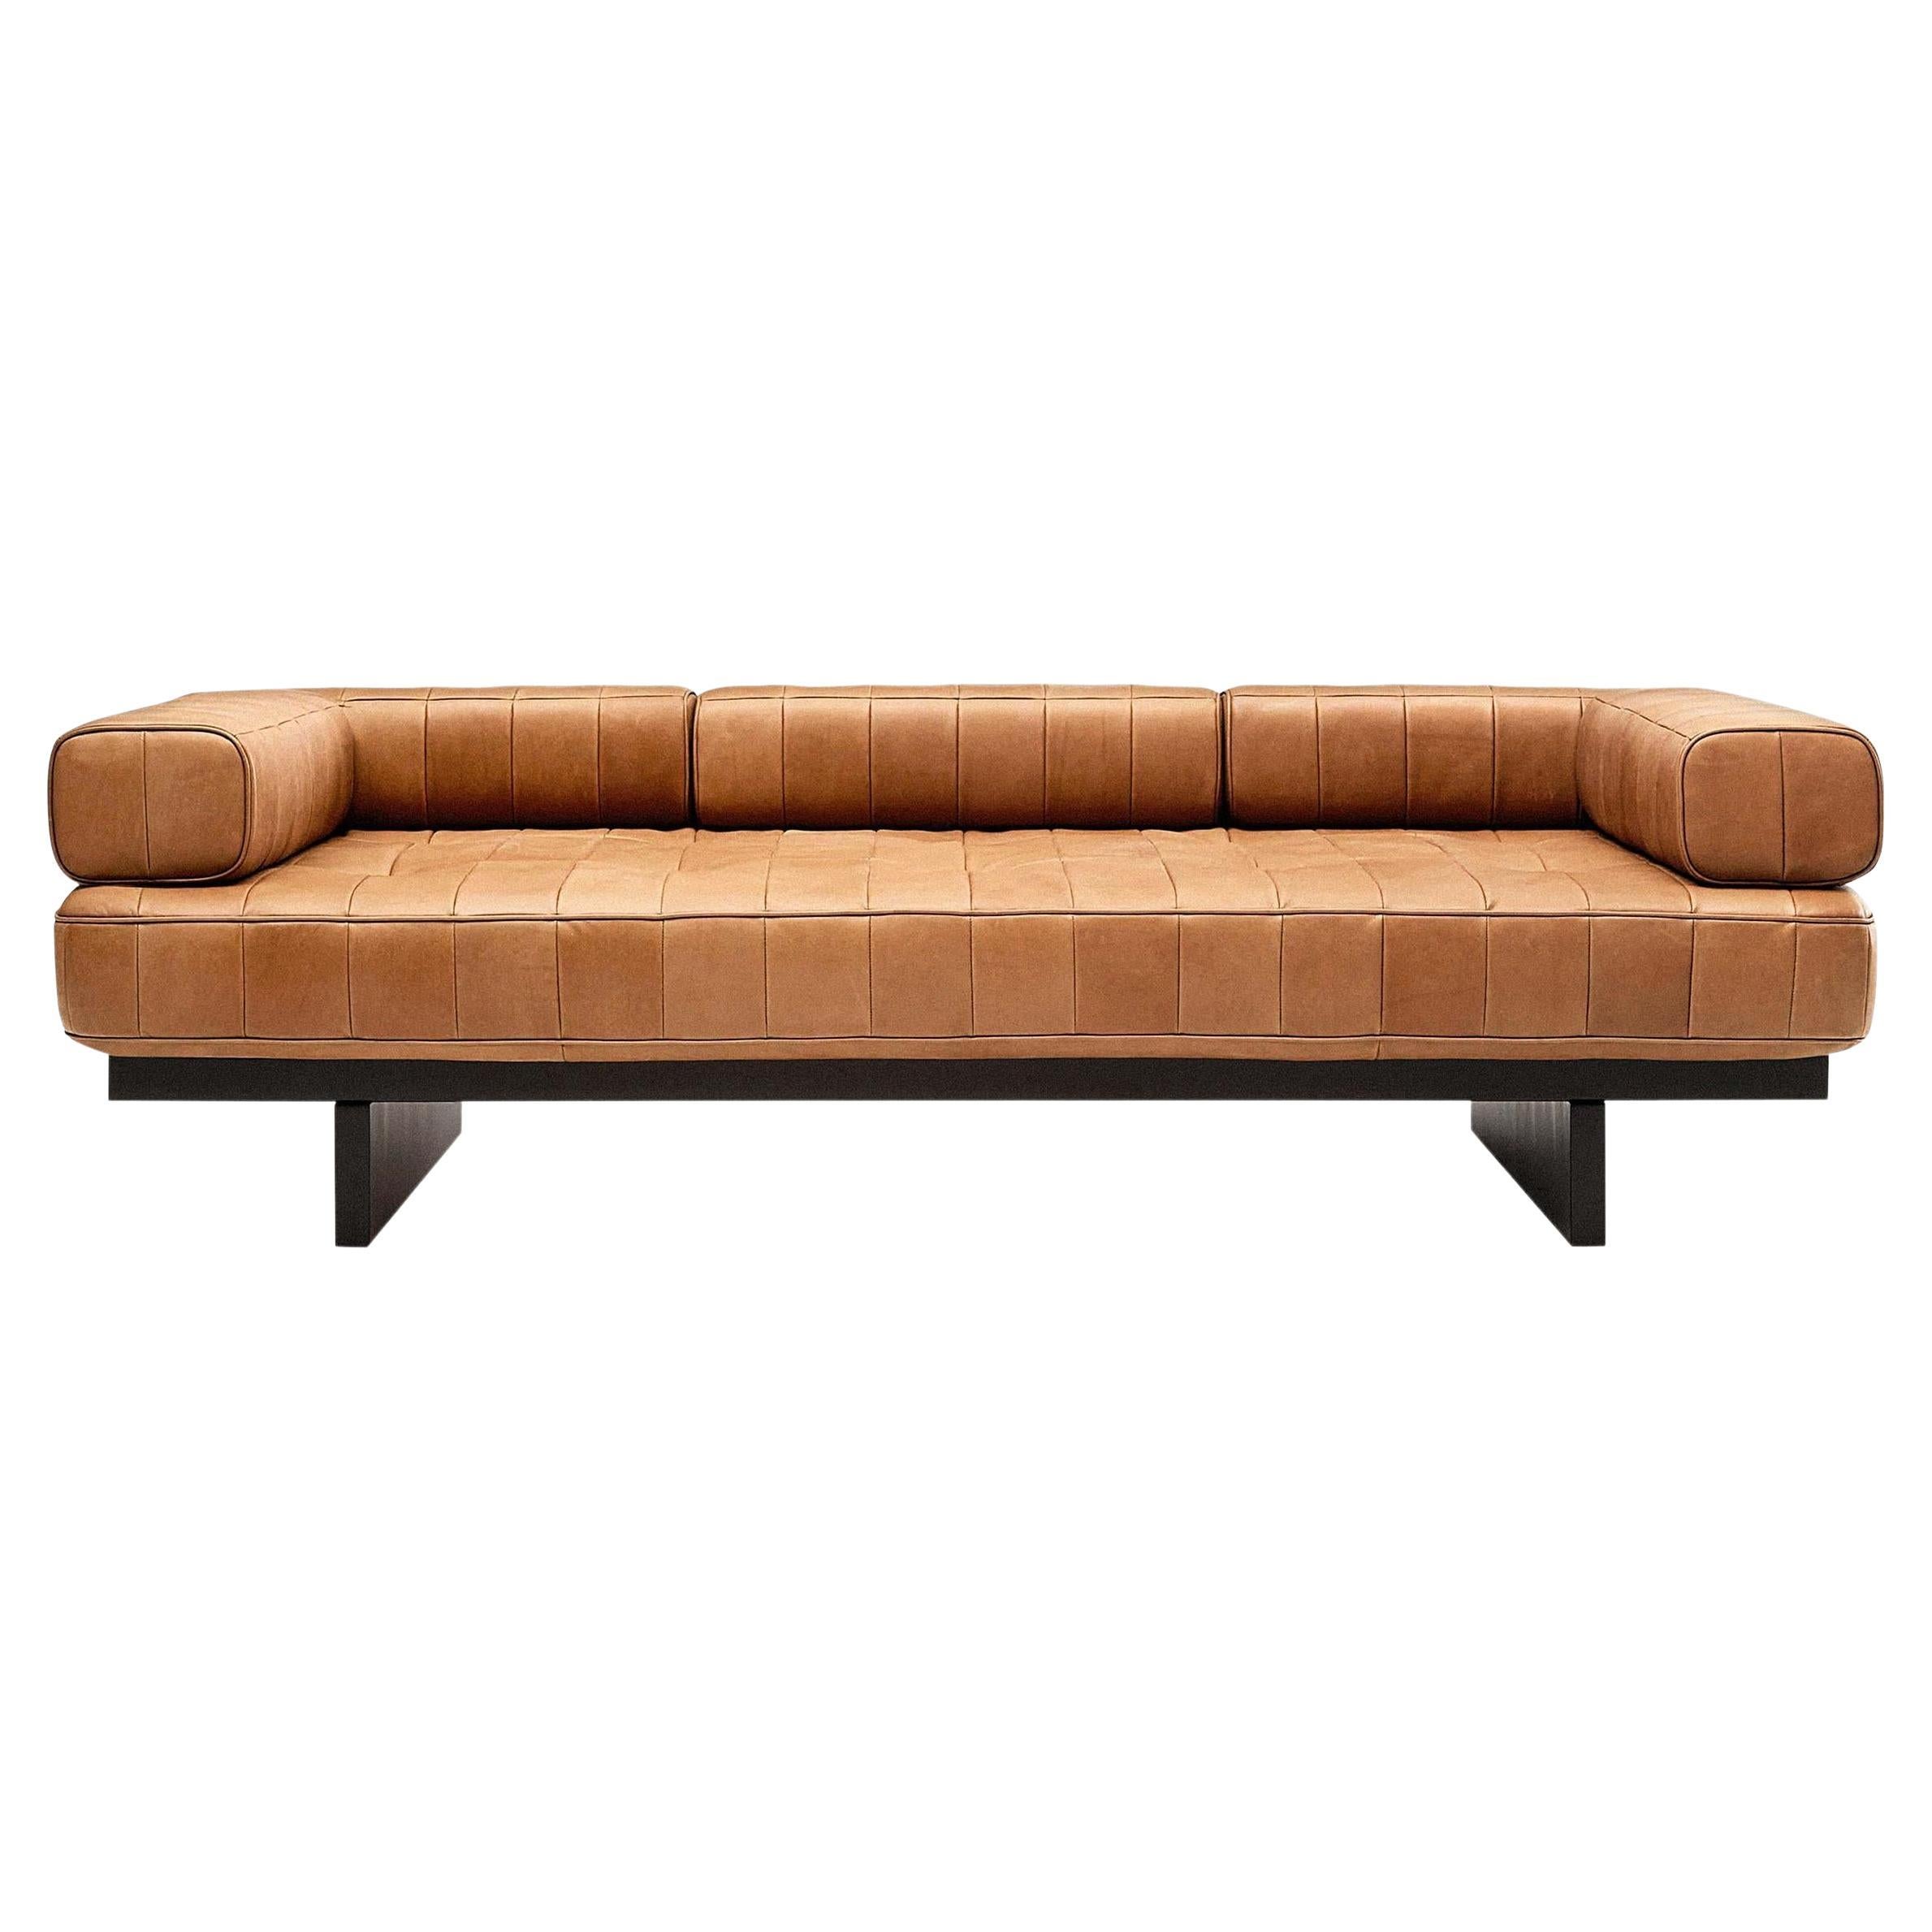 De Sede DS 80 Three-Seat Sofa in Naturale cuoio leather For Sale